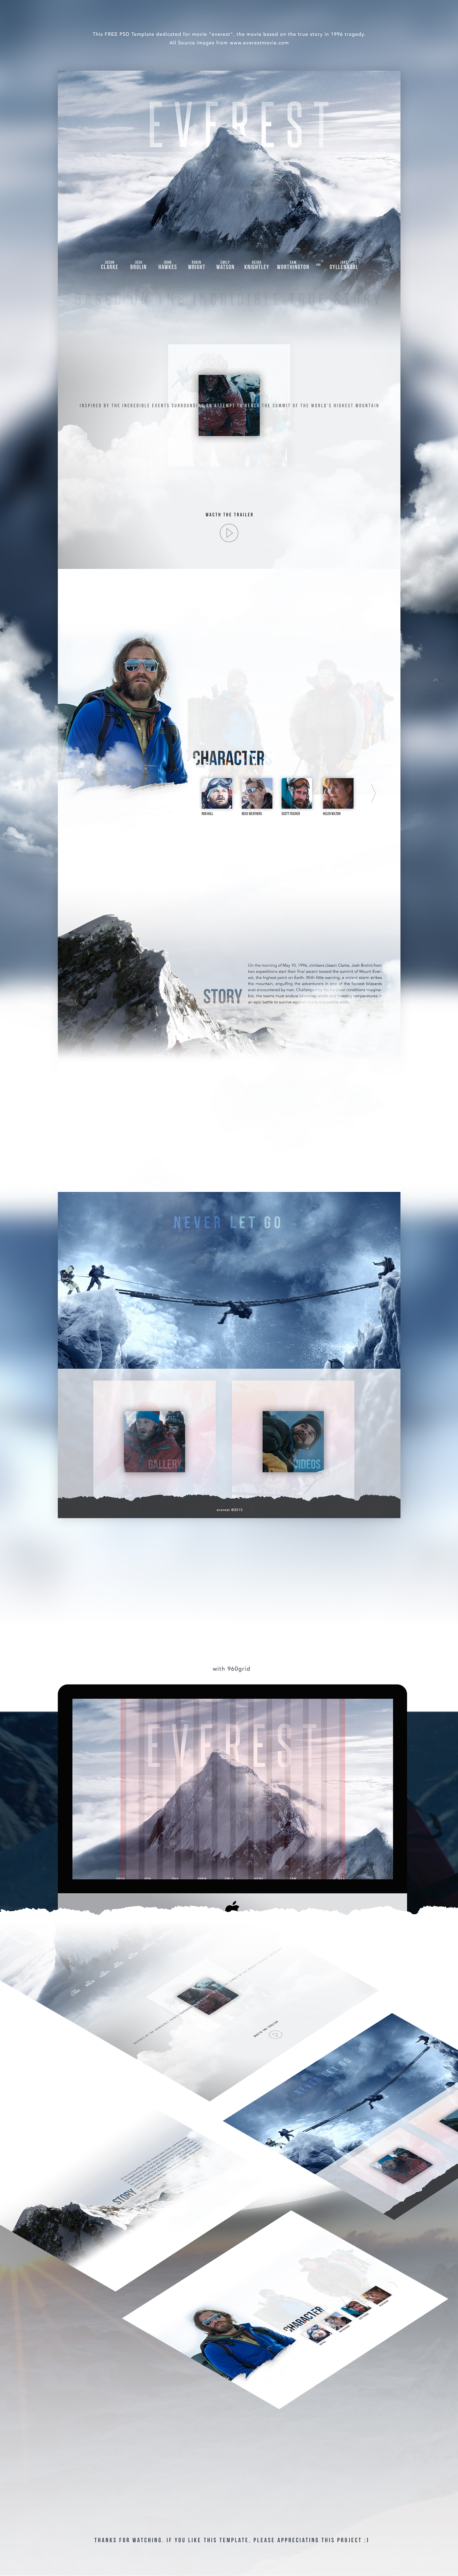 montain everest movie template free freebies psd Website adventure UserInterface Indonesian bandung seven summit clean download